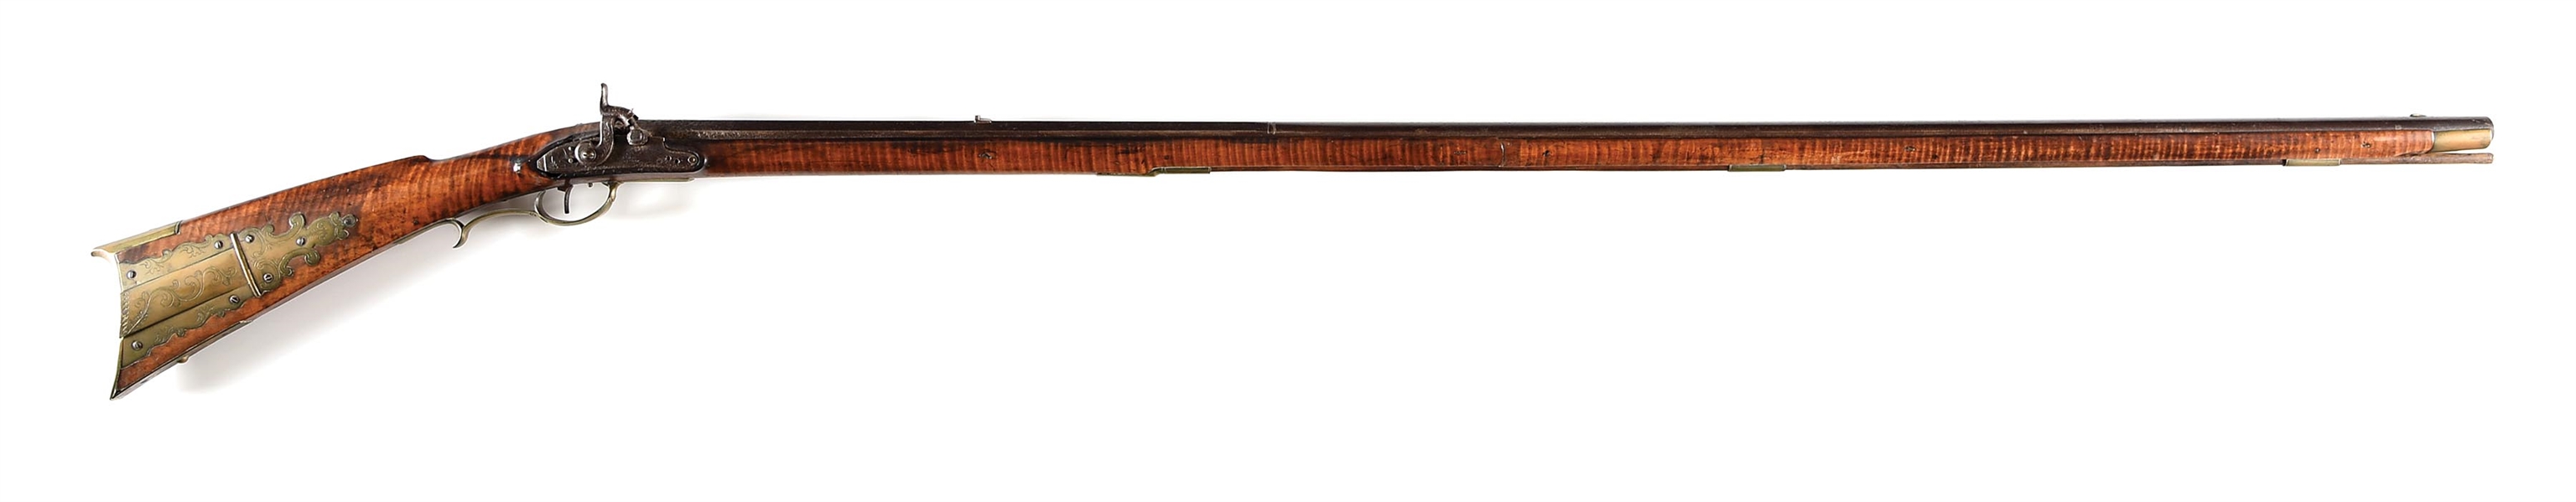 (A) G. FEDER PERCUSSION KENTUCKY RIFLE FROM THE EAGLE MUSEUM COLLECTION.